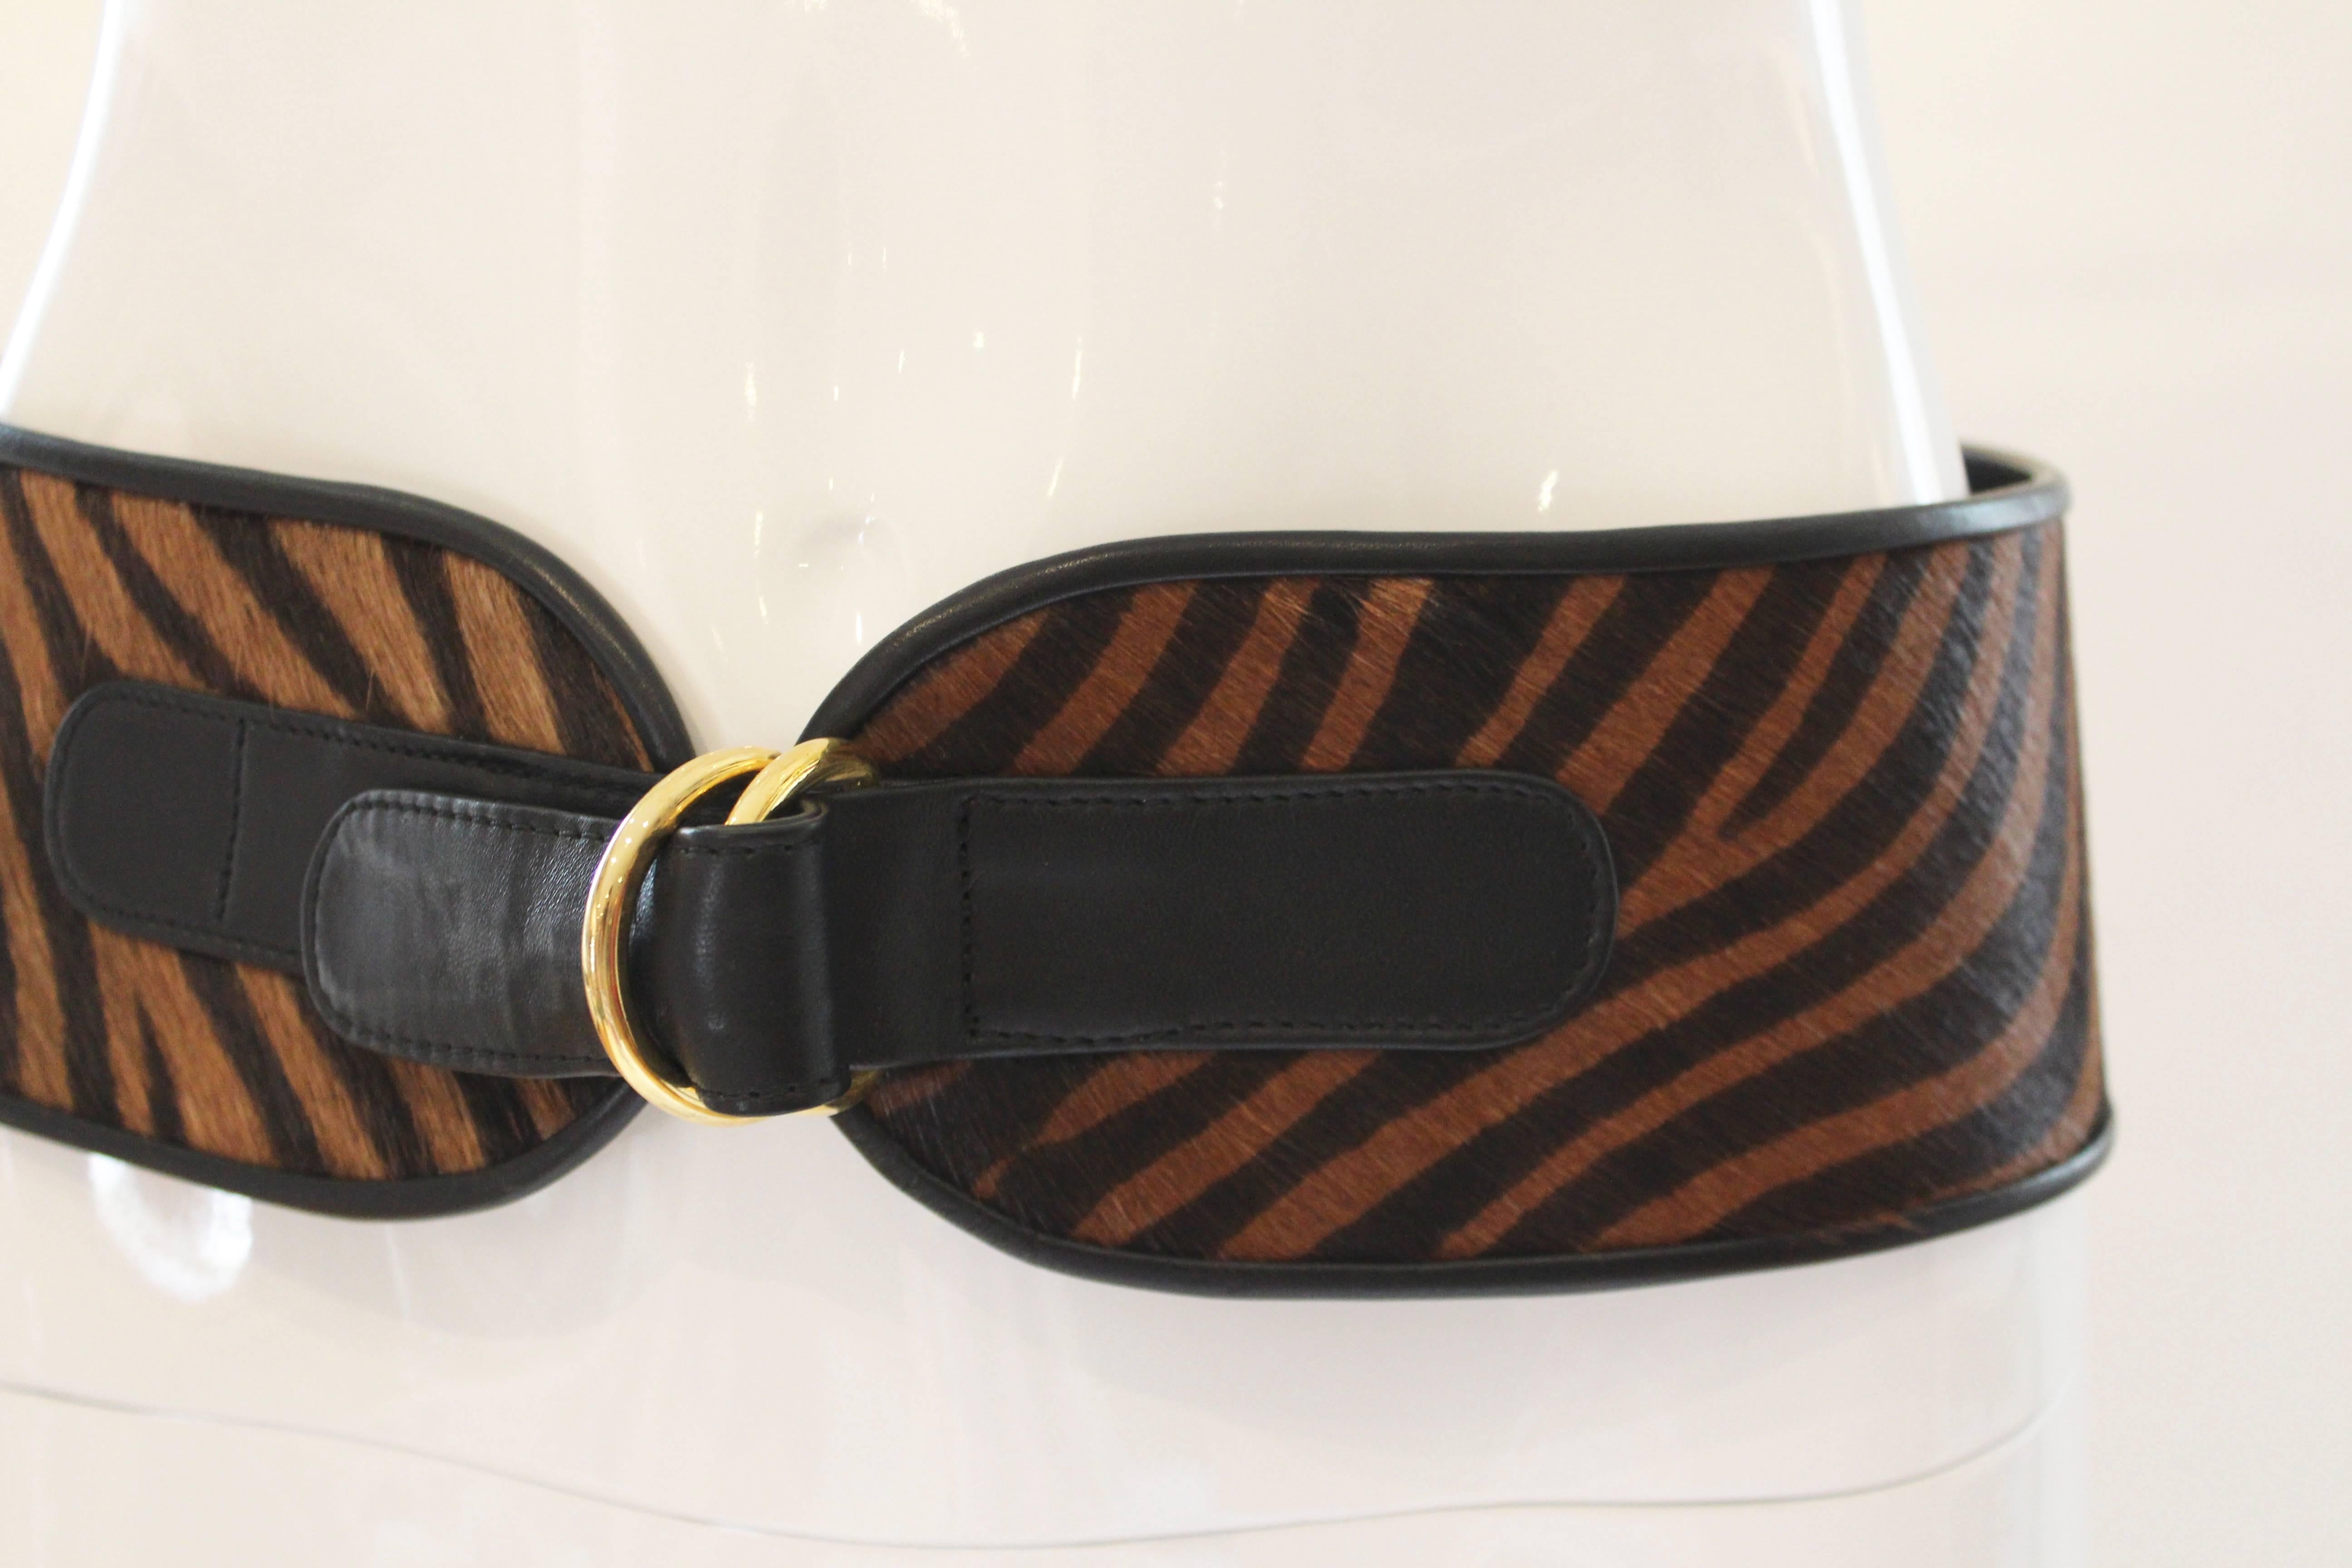 
This fabulous black and brown zebra striped belt will cinch any outfit to perfection.  Makes a bold statement with its generous width and is nicely finished off with leather and gold ring closure .  Truly a great statement belt! 
Measurements in